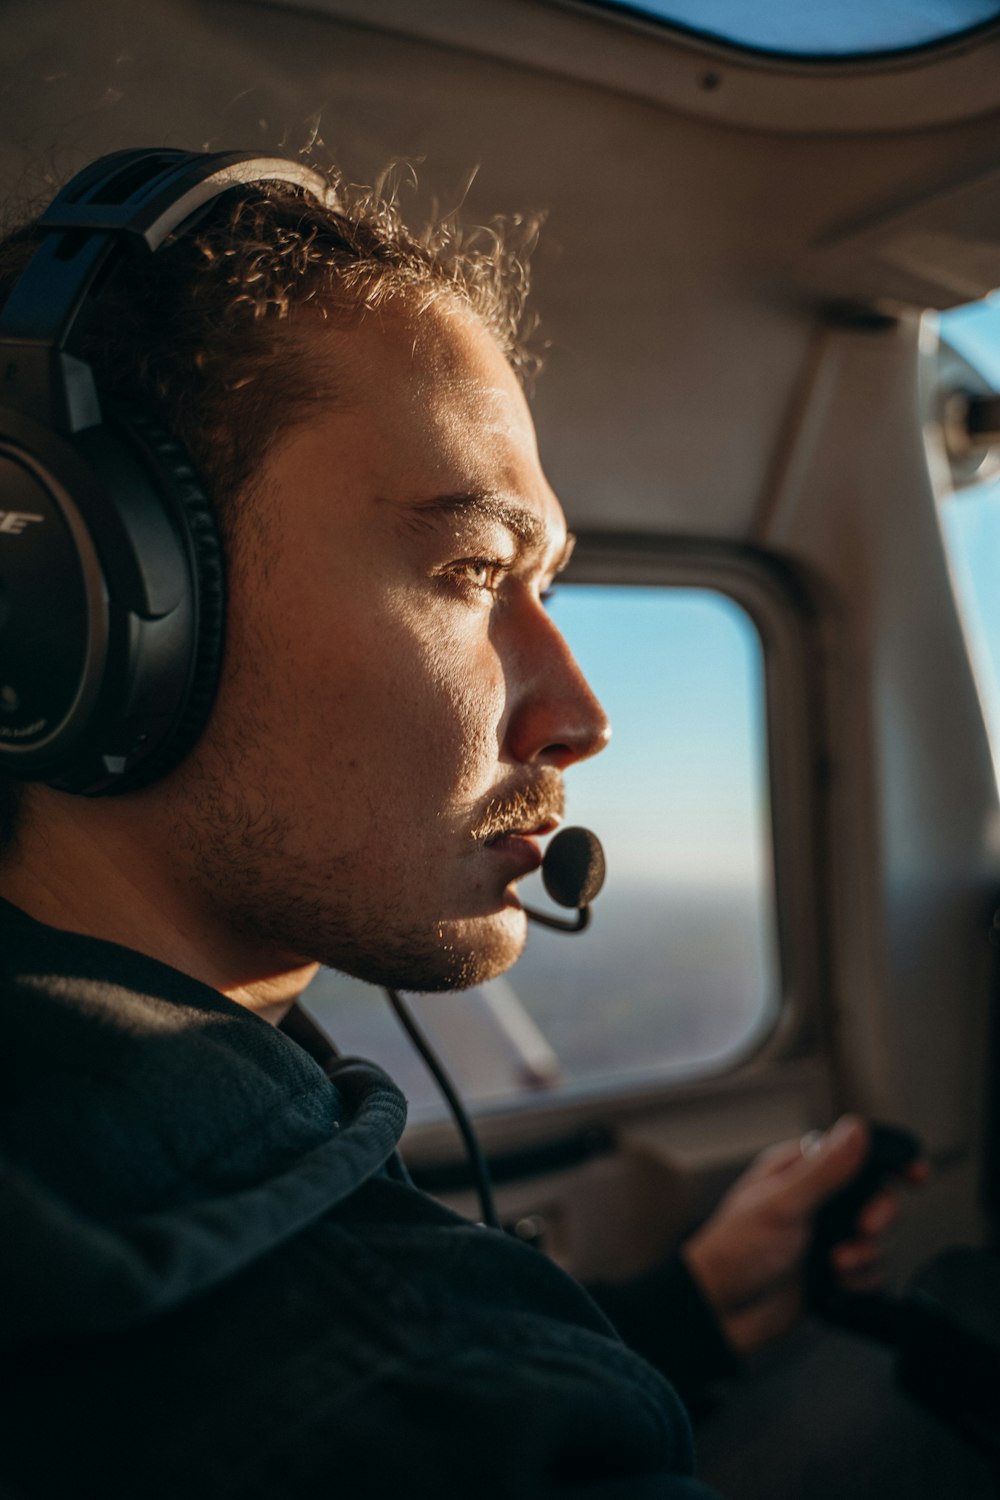 a man wearing headphones while sitting in a plane